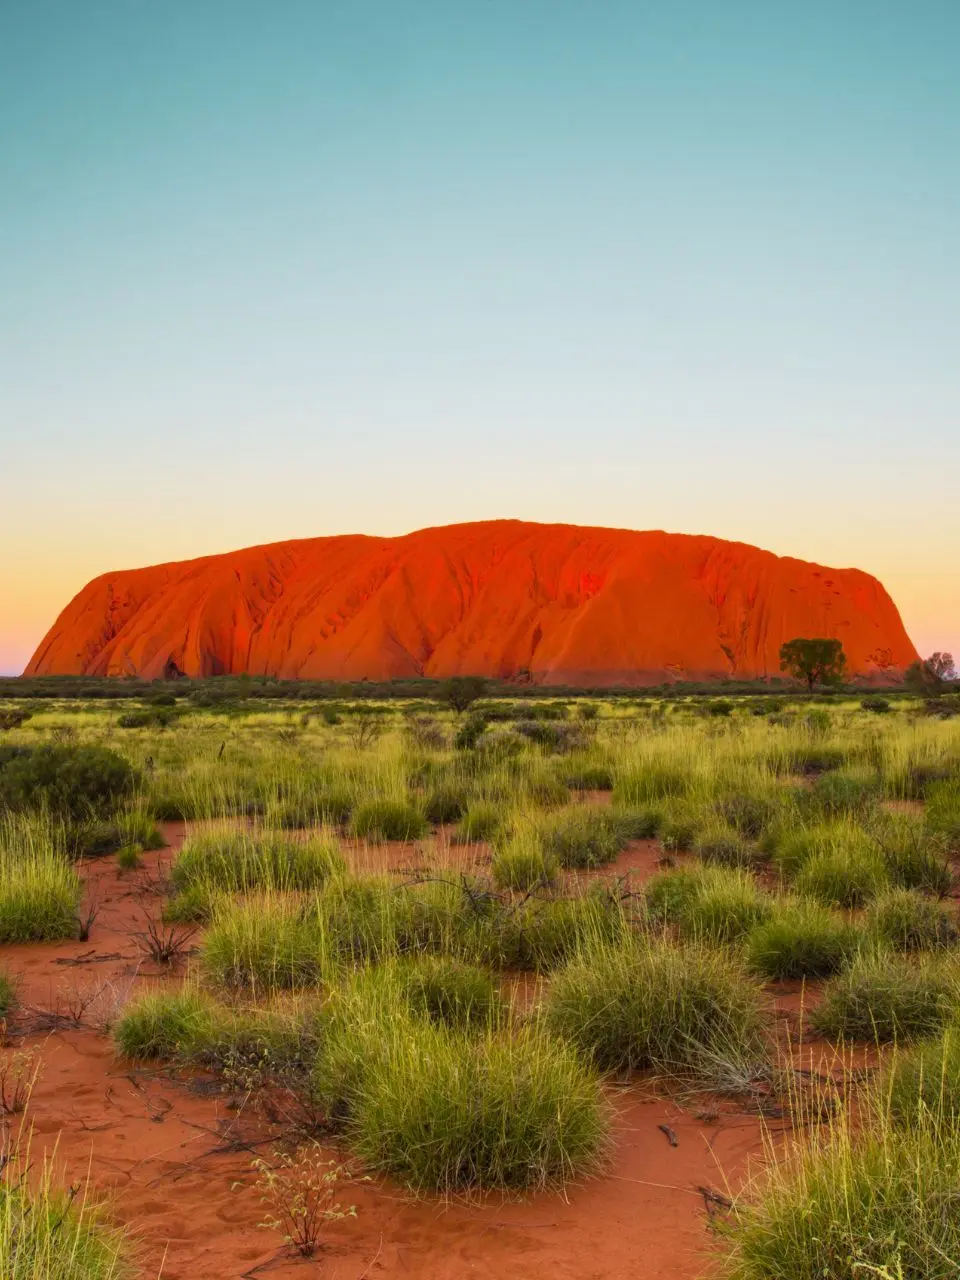 An image of Uluru, also known as Ayers Rock, the massive reddish sandstone rock formation located in the southern part of Northern Territory, Australia. Seen at the far back, with green lumps of grass on the foreground, image size with aspect ratio 3x4.